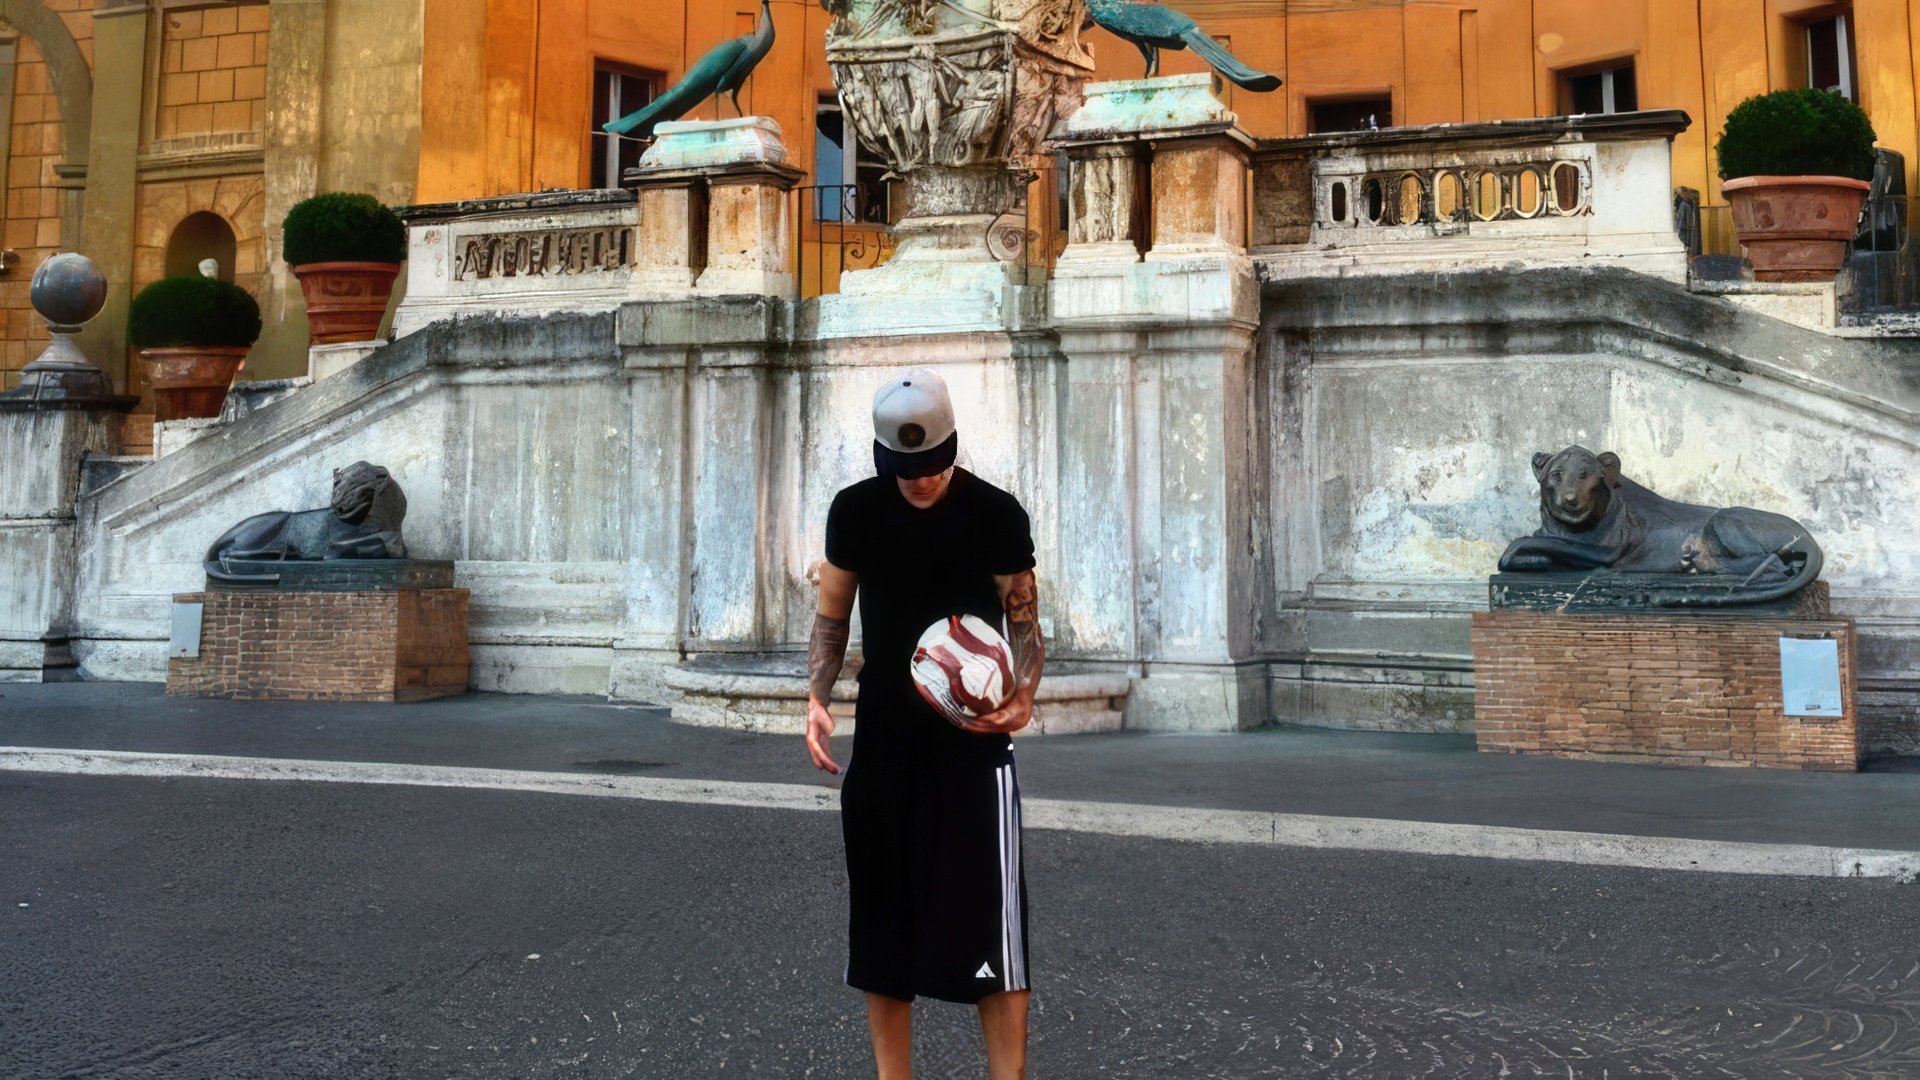 Justin Bieber playing football in the Sistine Chapel